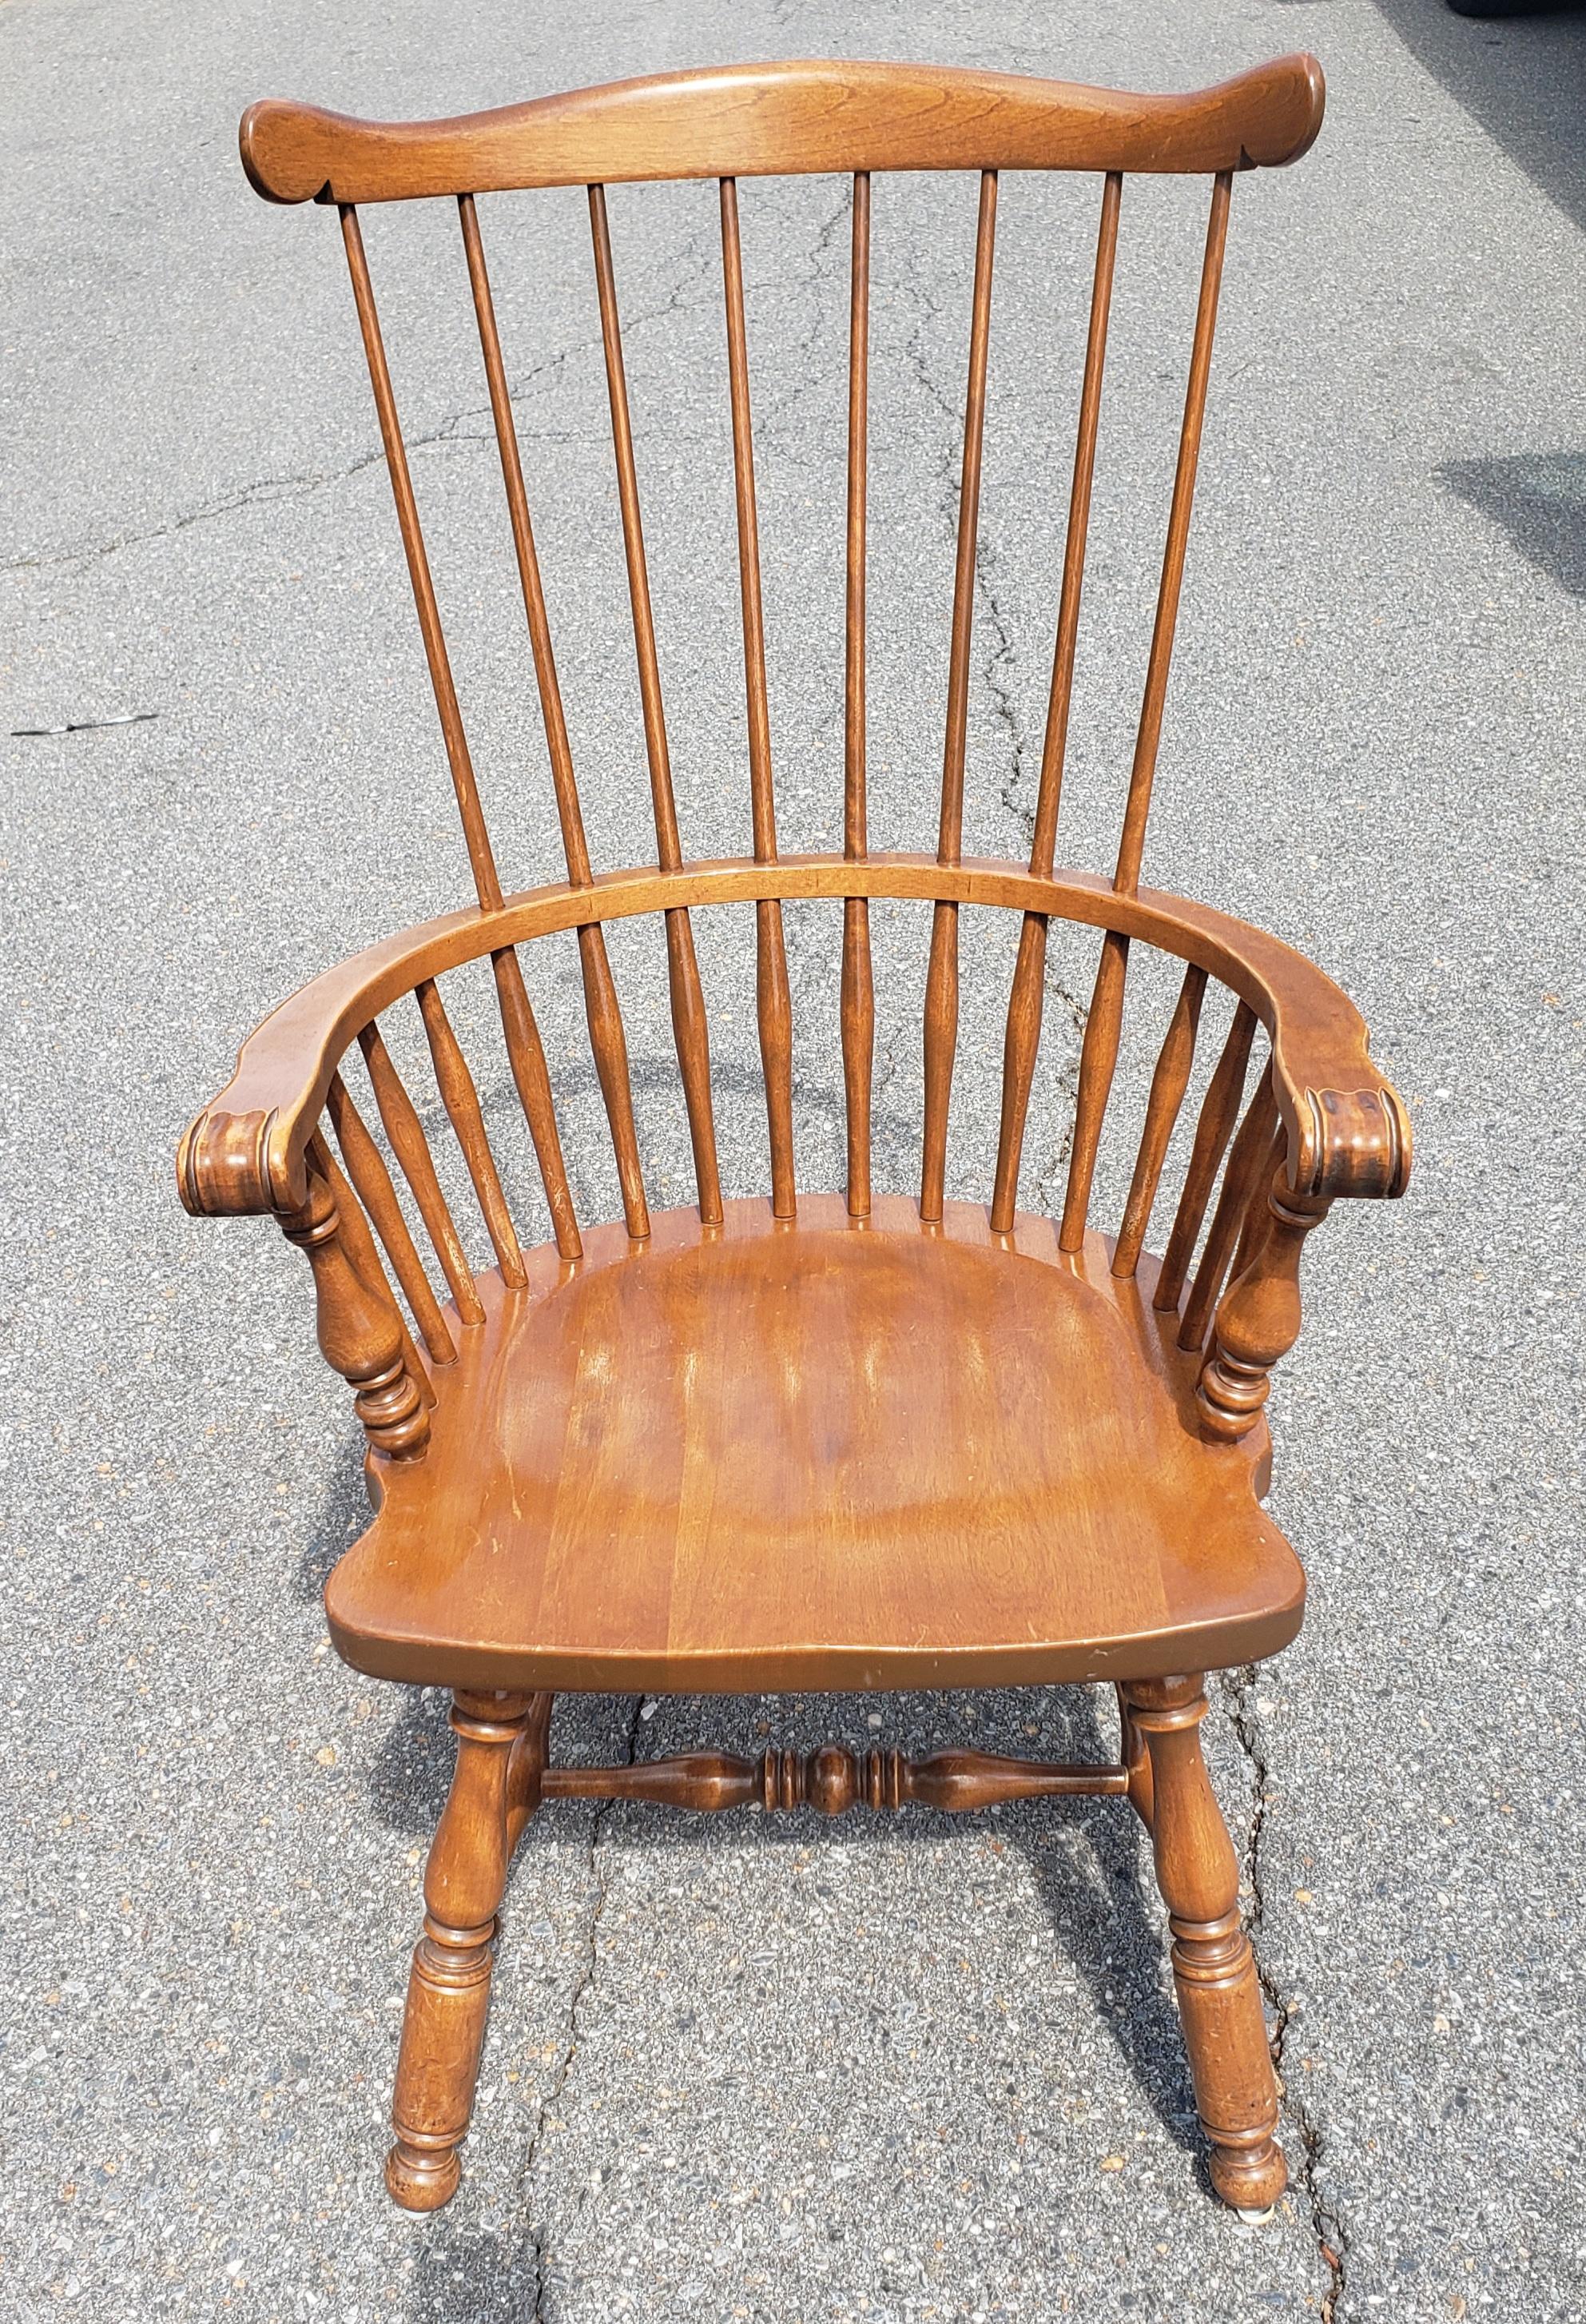 A midcentury Baumritter Maple Comb Back Windsor Armchair in very good vintage condition.
Very sturdy. Measures 23.5